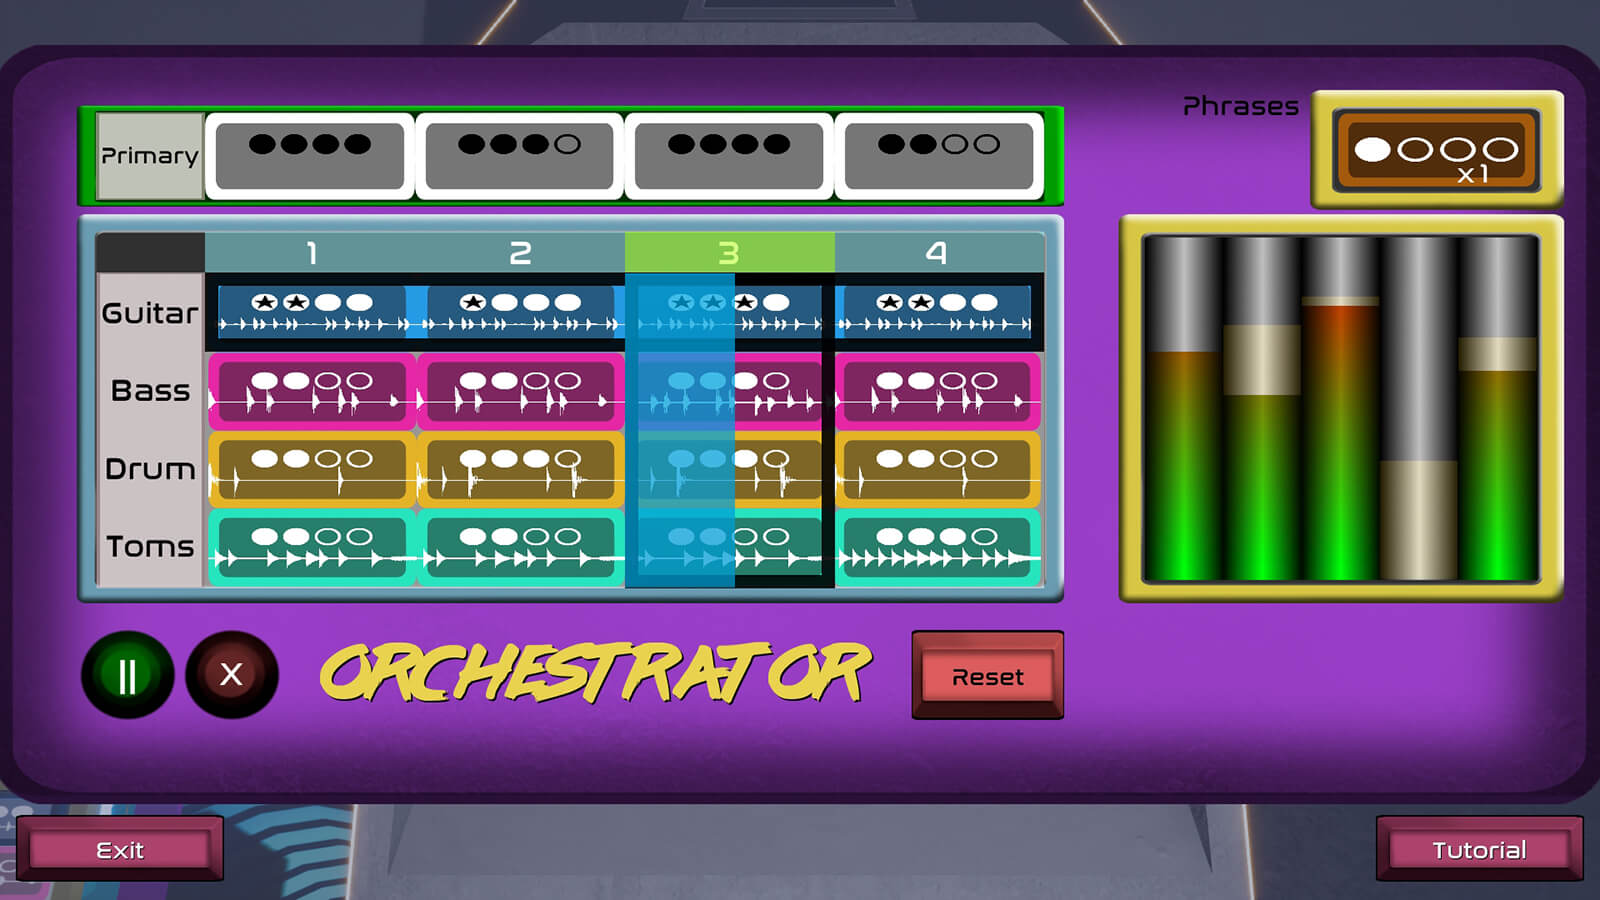 A menu called the "Orchestrator" showing instrument based phrases the player can use to attack enemies. 